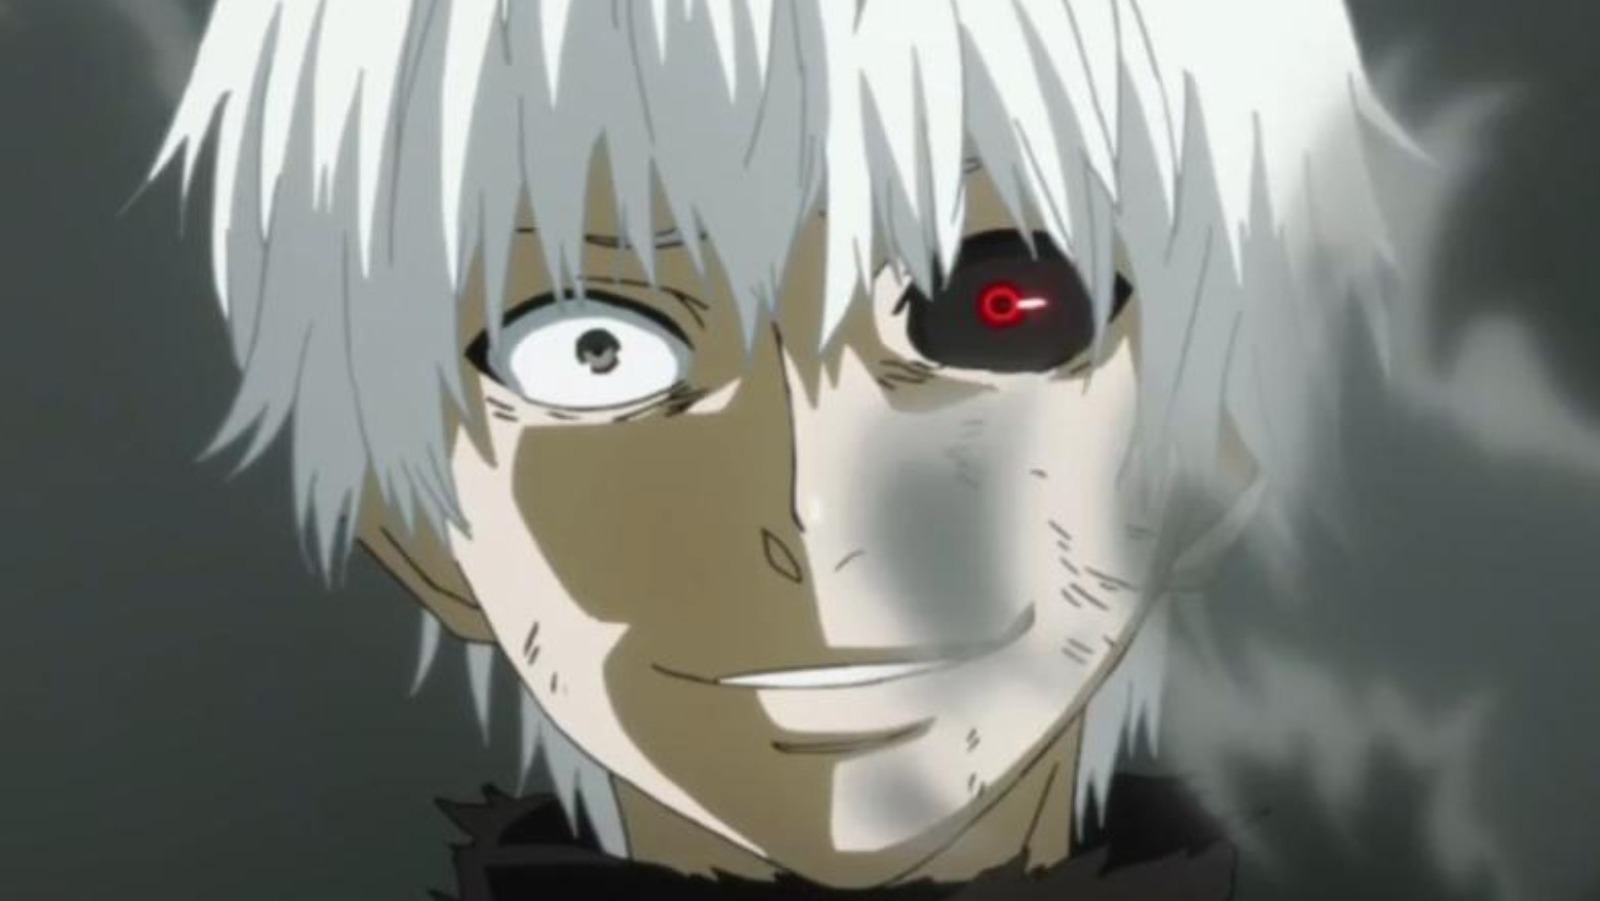 15 Strongest Tokyo Ghoul Characters Ranked